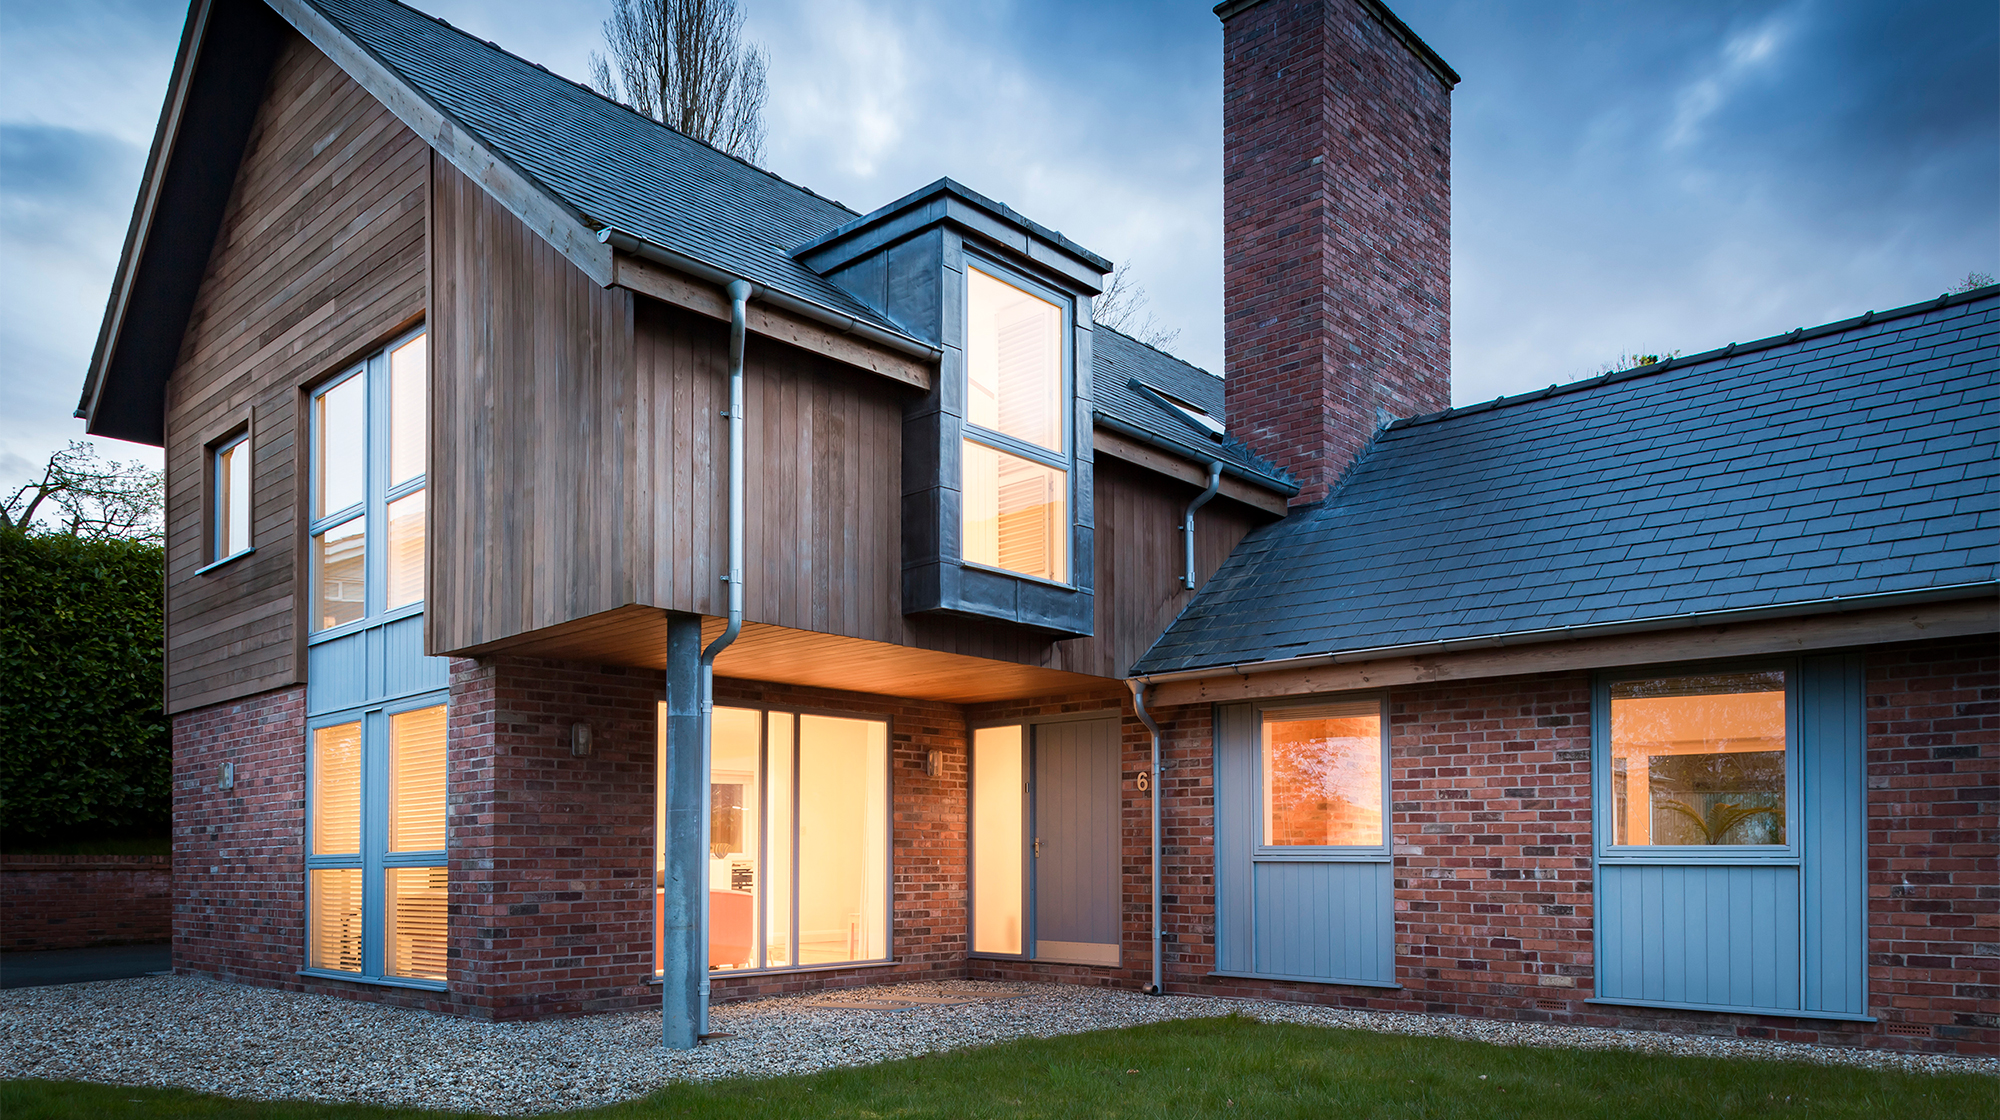 Contemporary residential property - front view of private house exterior at dusk